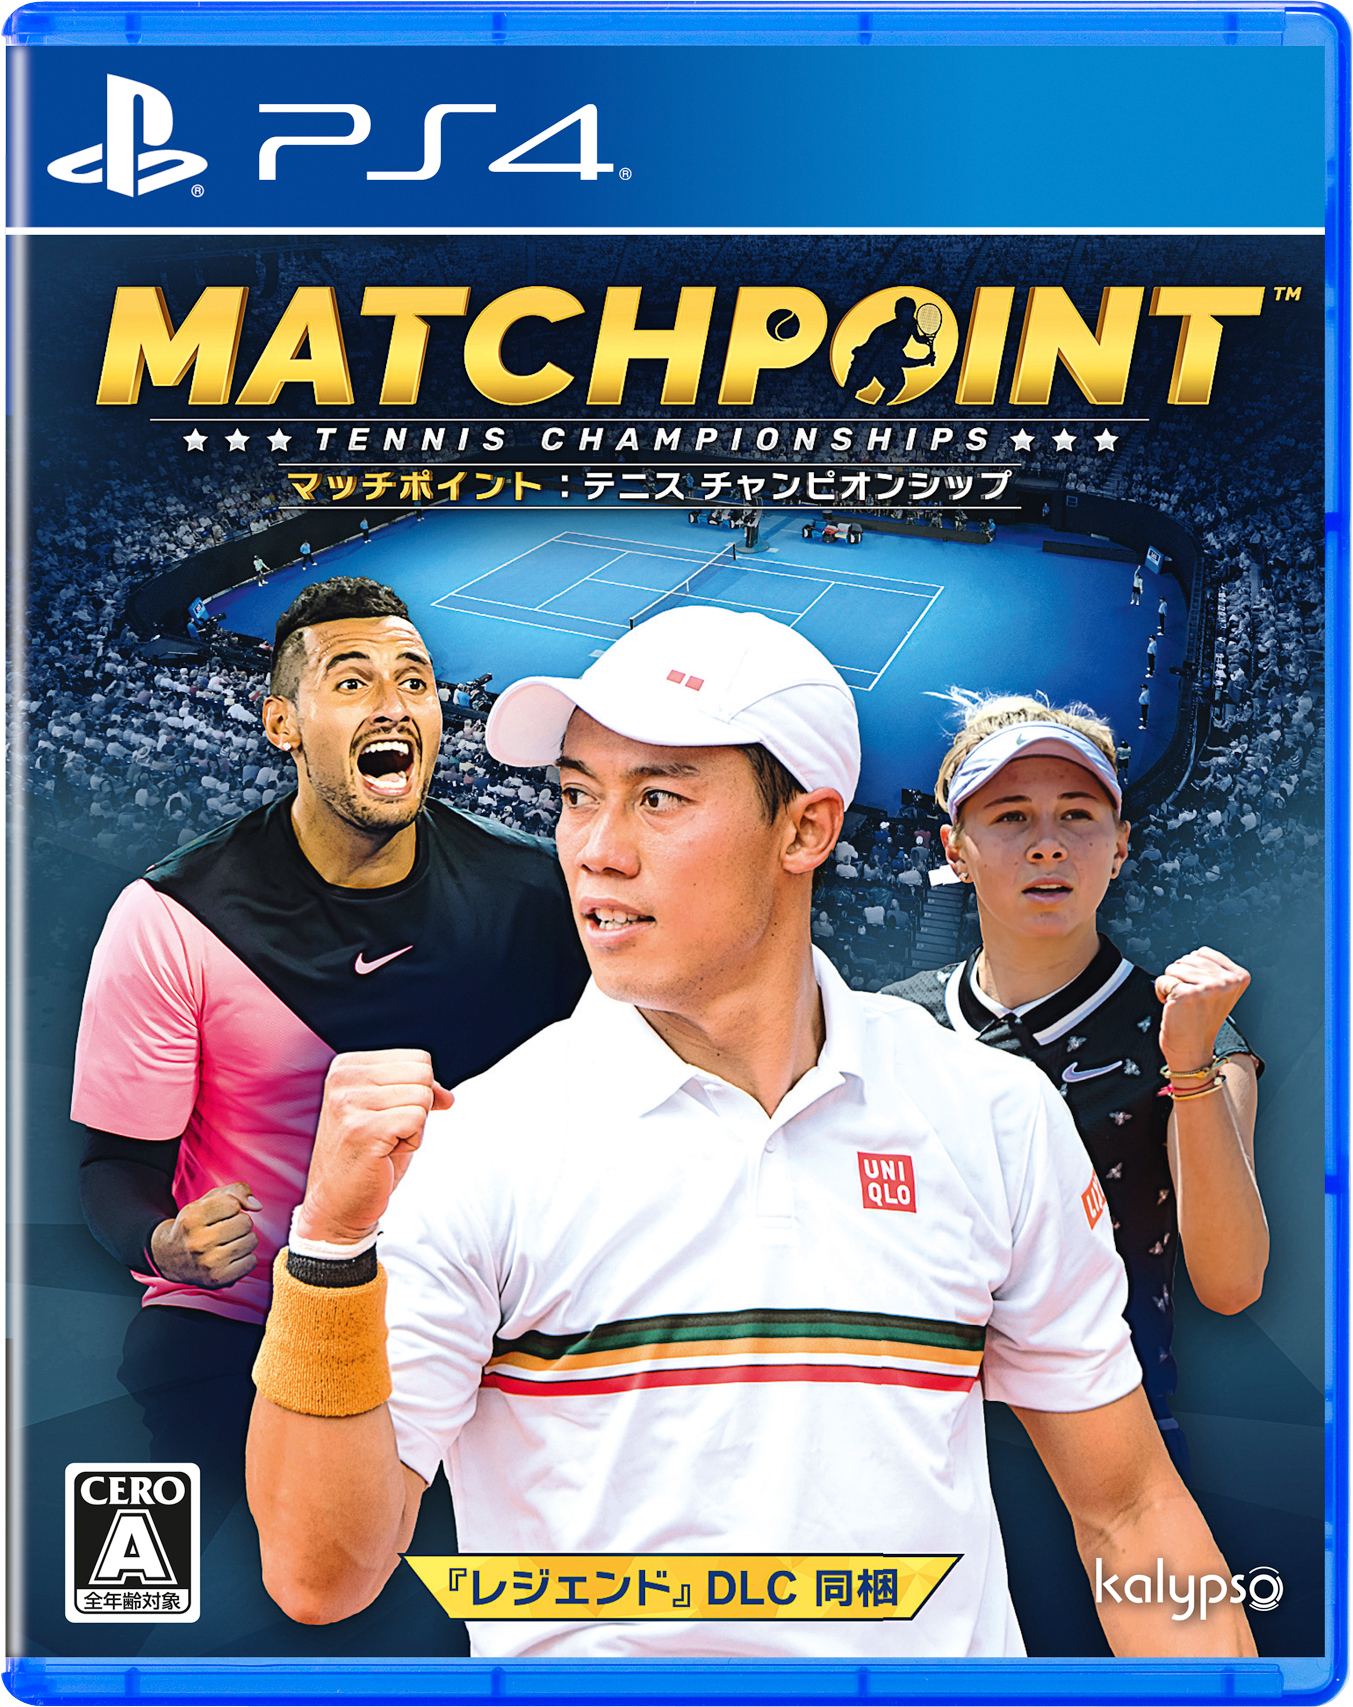 Matchpoint Tennis Championships (English) for PlayStation 4